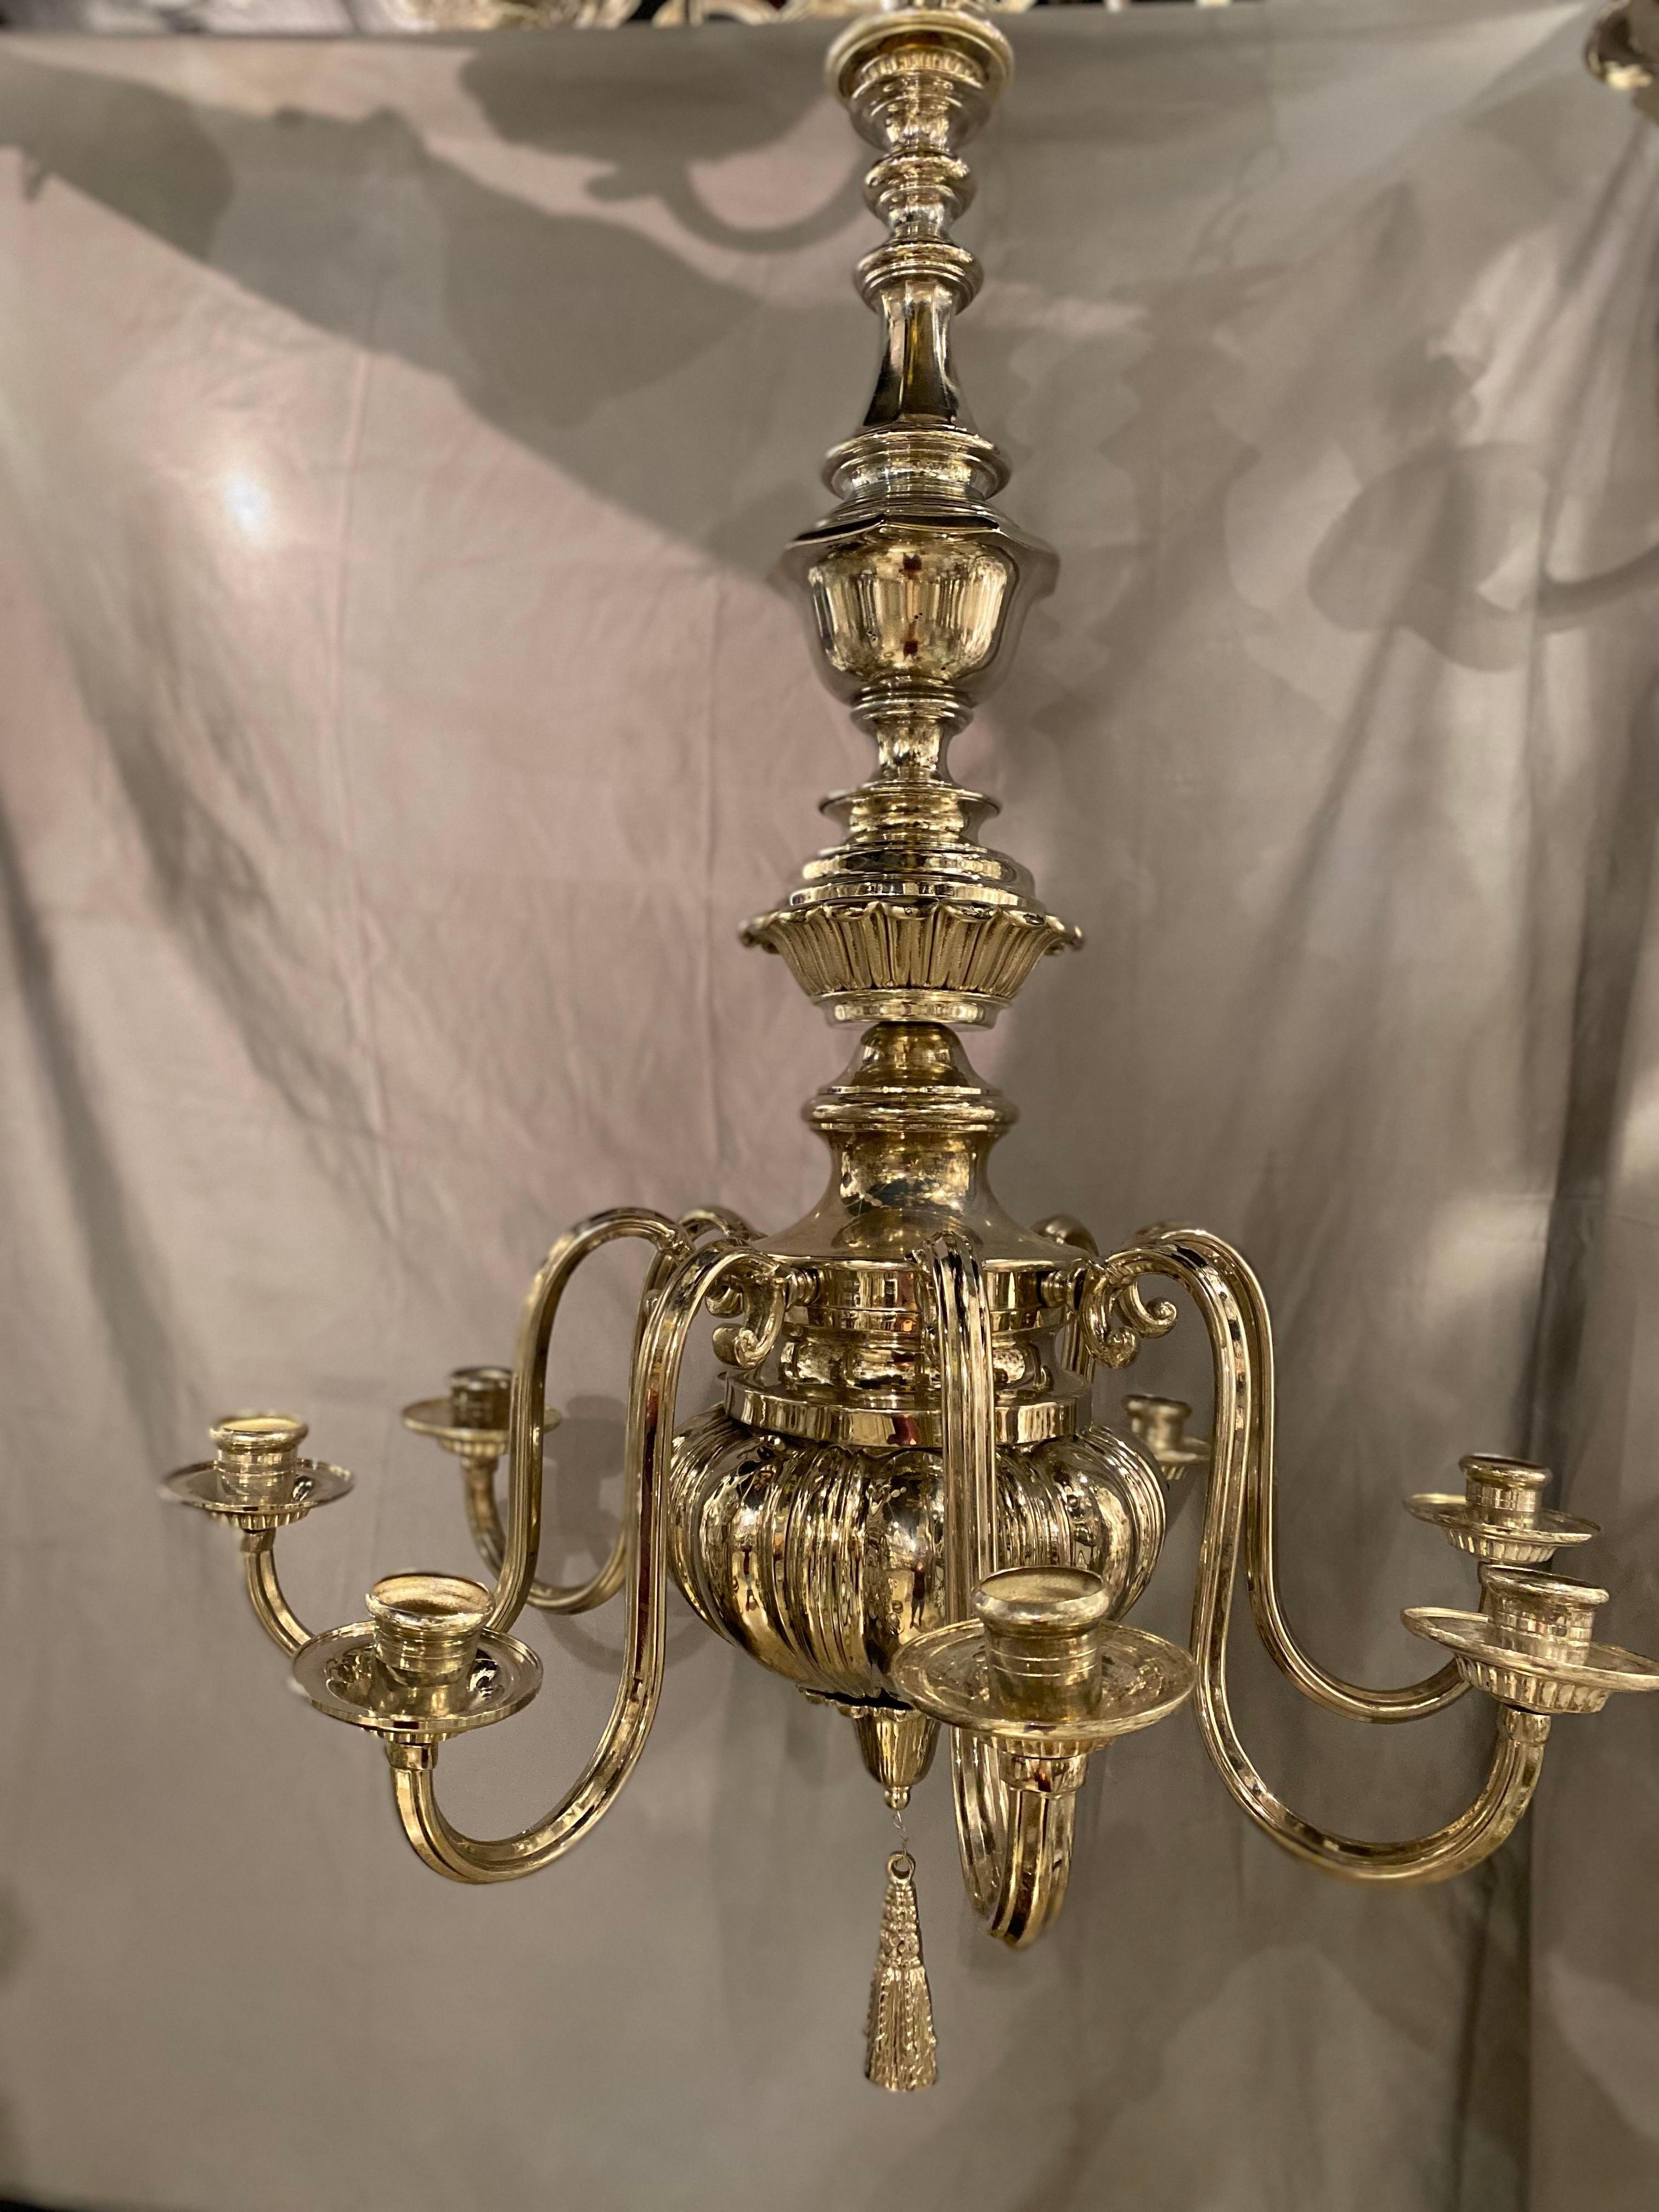 A circa 1920's Caldwell silver plated chandelier with 8 lights